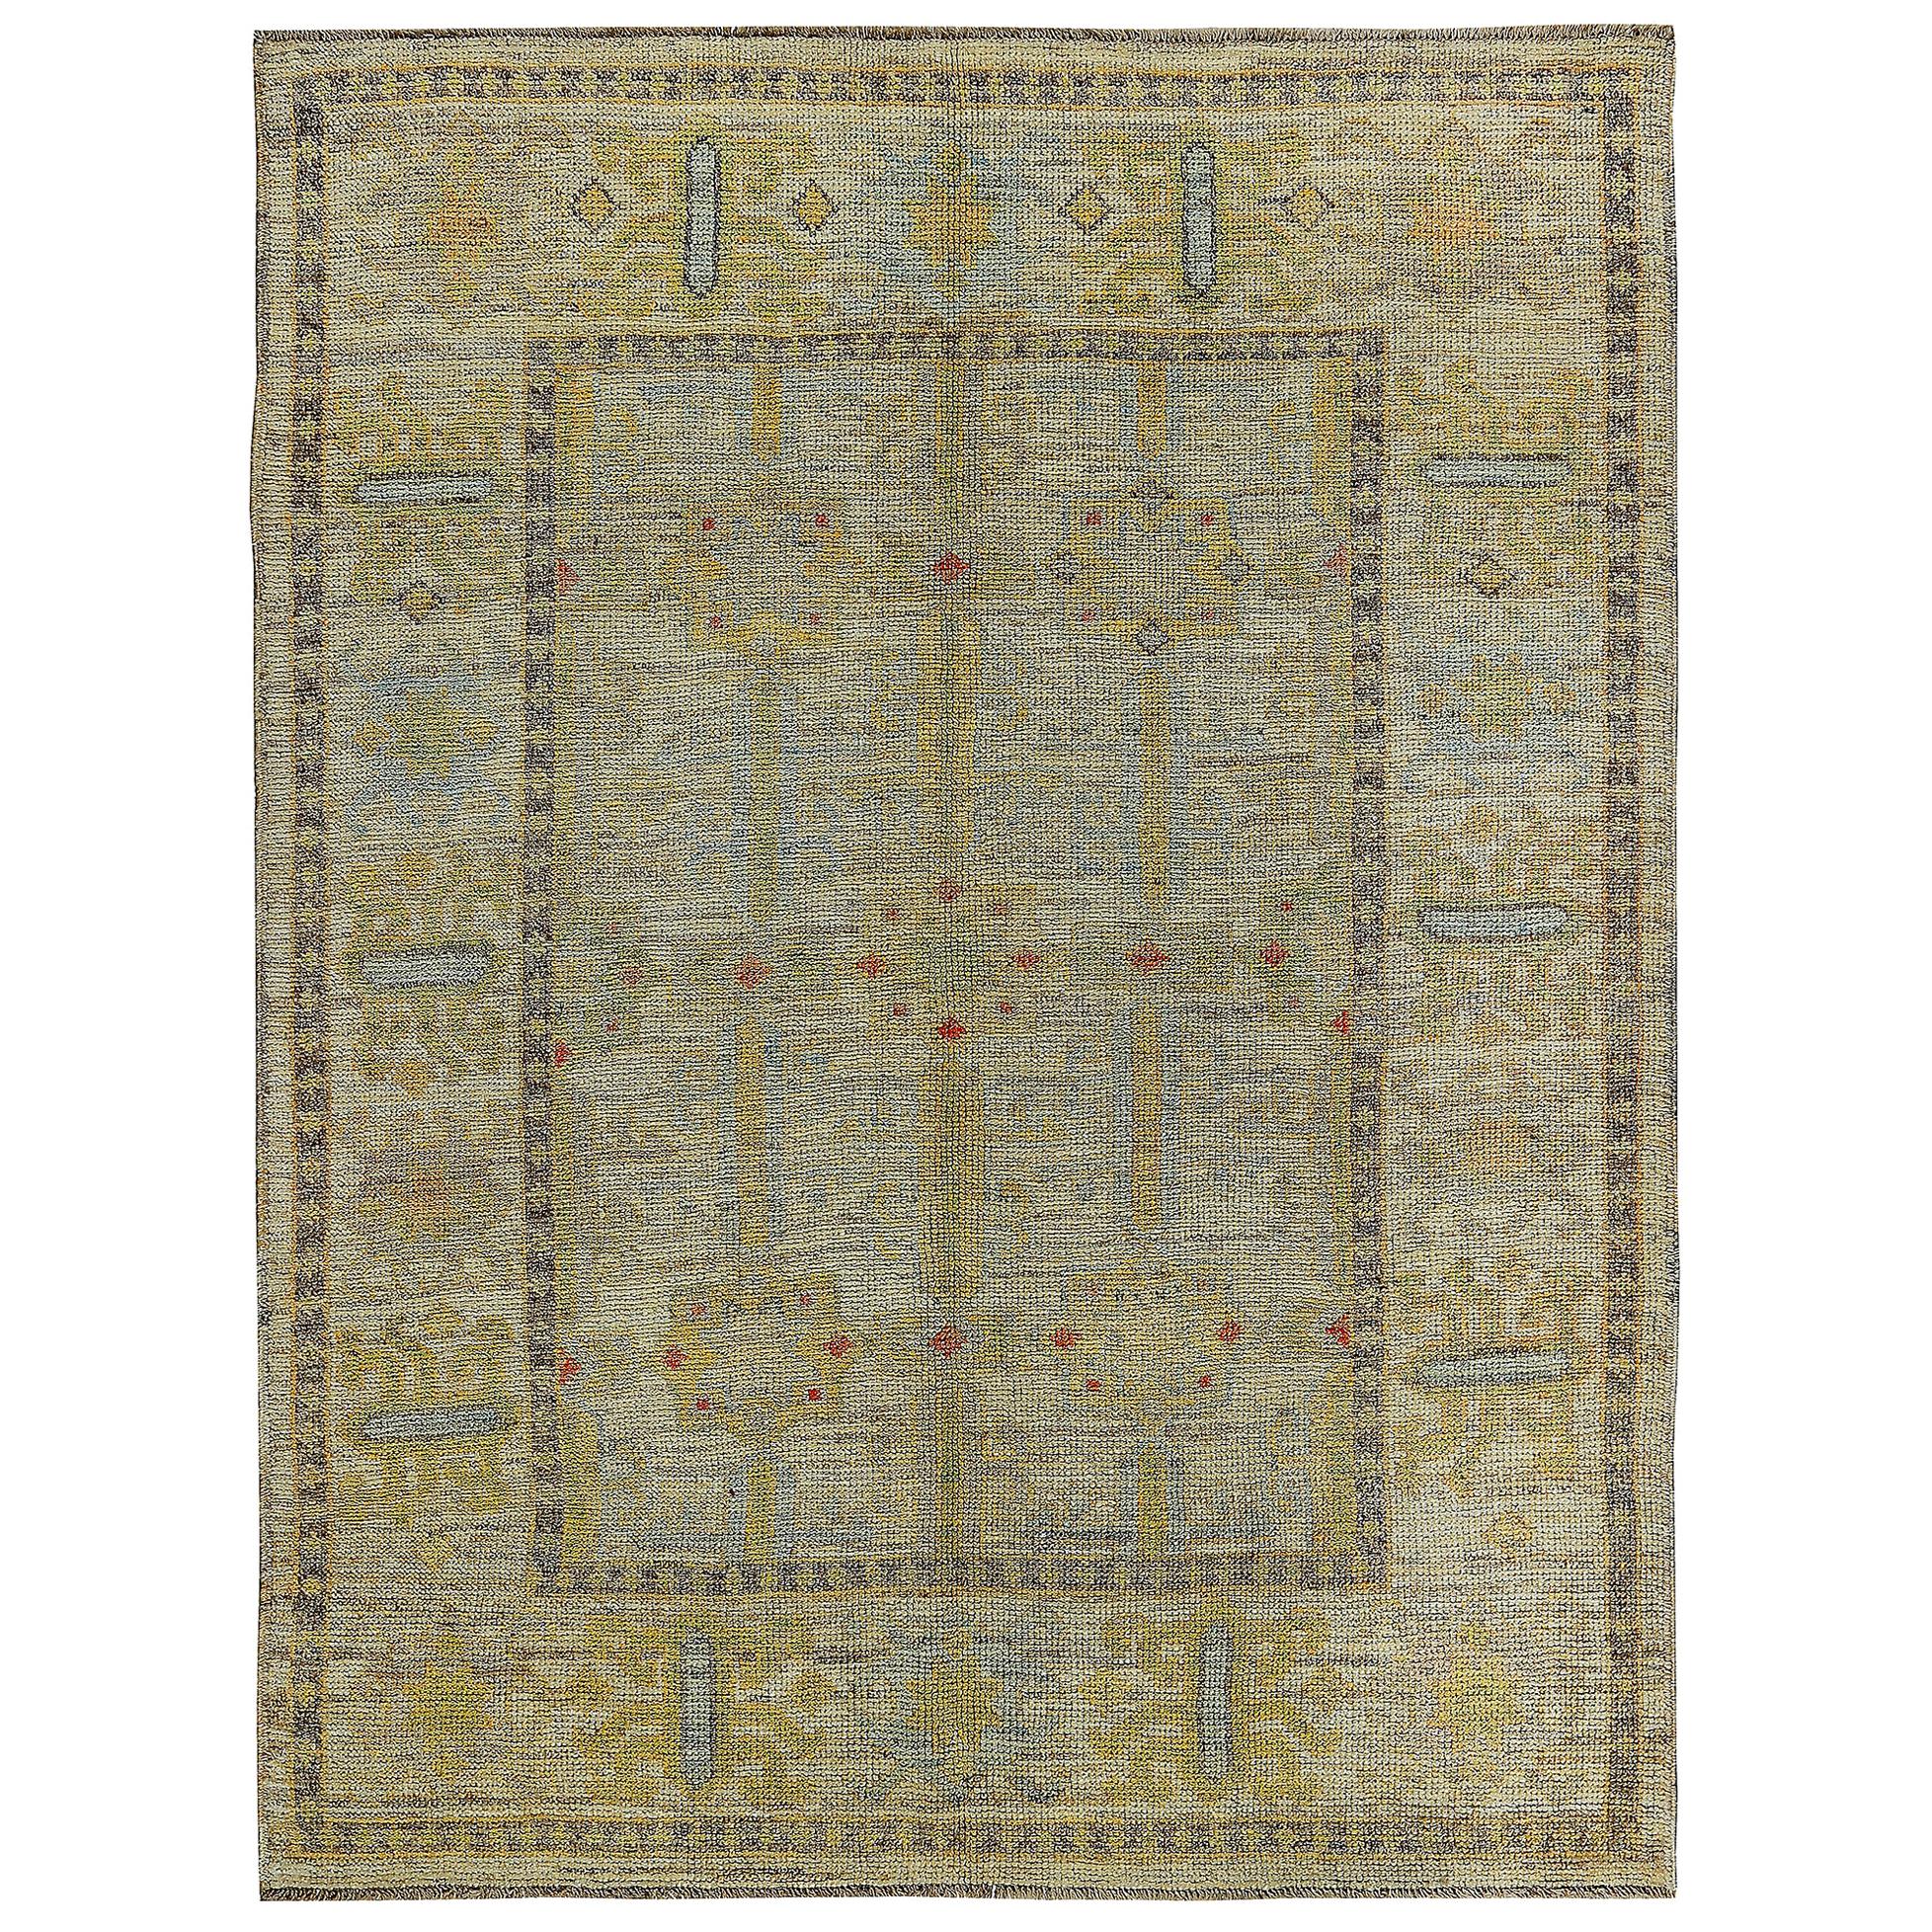 Nazmiyal Collection Geometric Modern Turkish Oushak Rug 5 ft 2 in x 6 ft 8 in